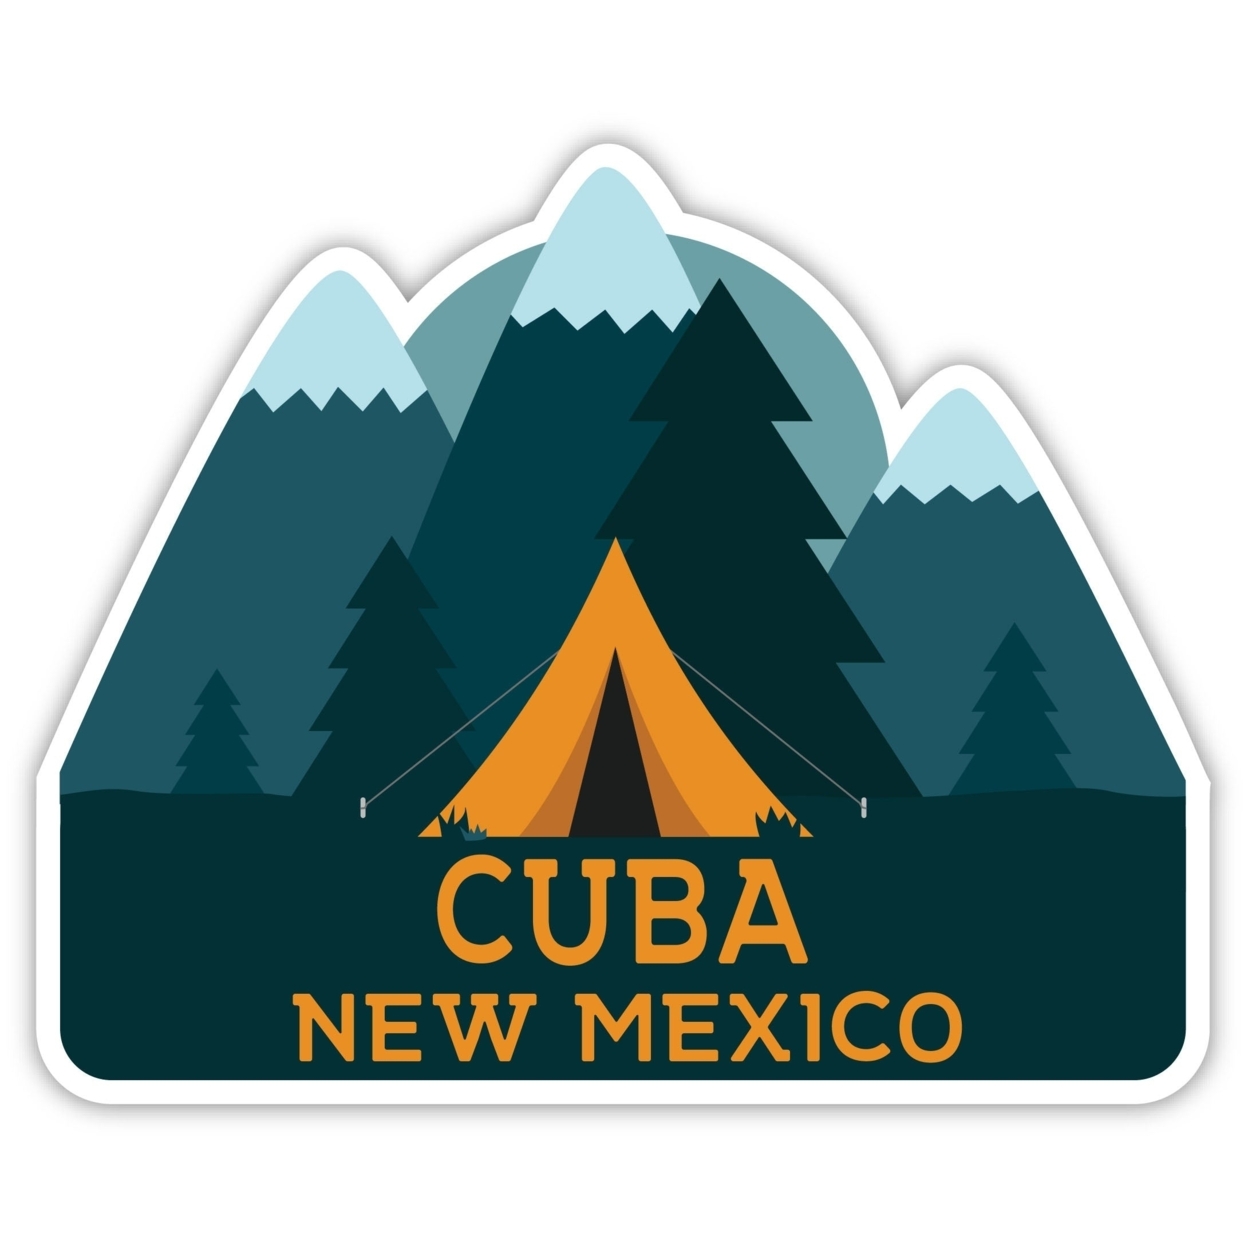 Cuba New Mexico Souvenir Decorative Stickers (Choose Theme And Size) - 4-Pack, 10-Inch, Tent